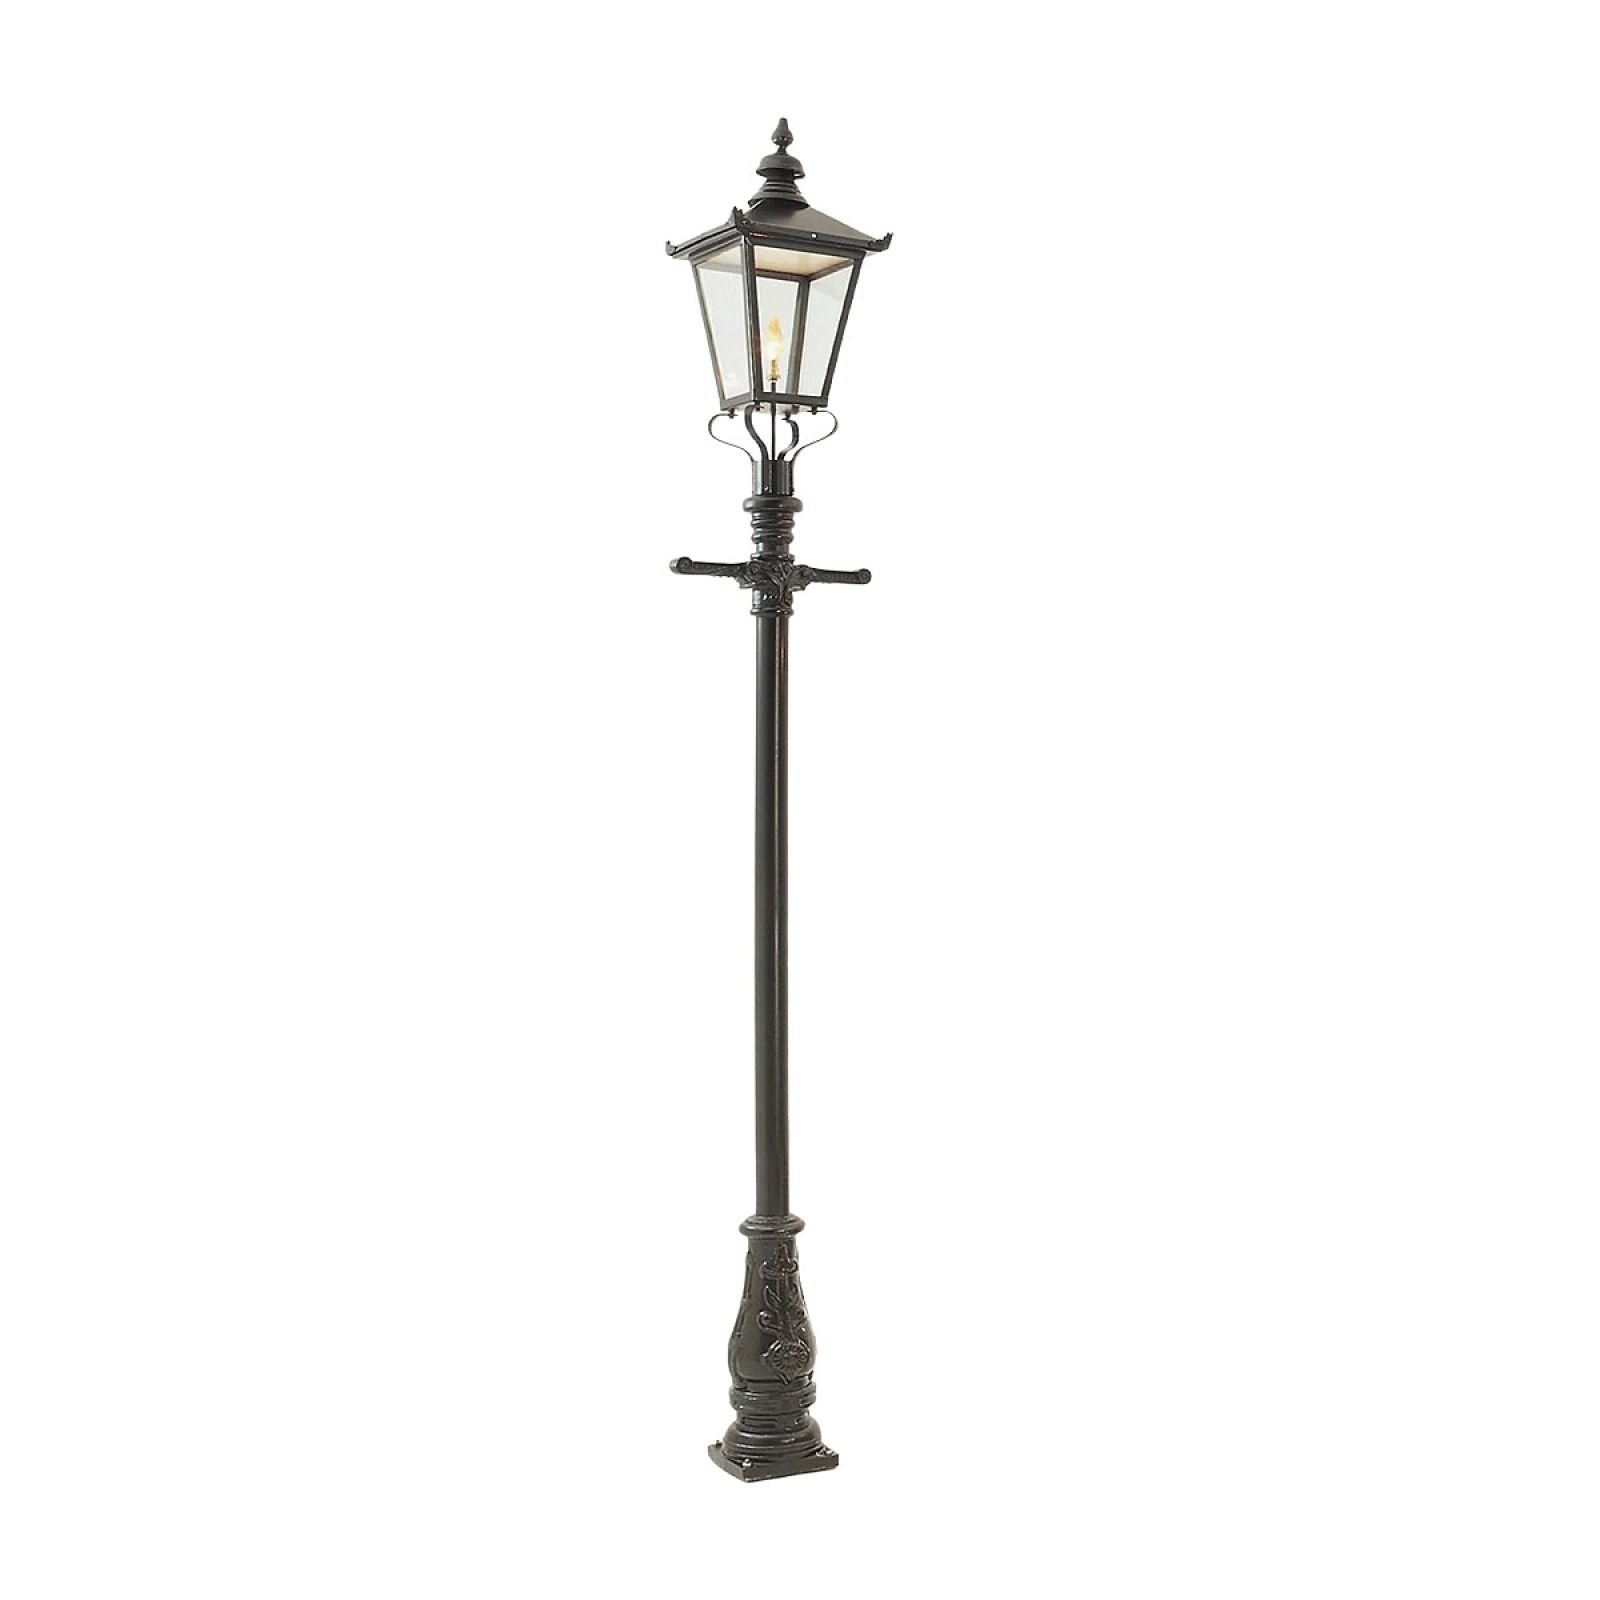 Lamp post 3050mm high and large square steel lantern